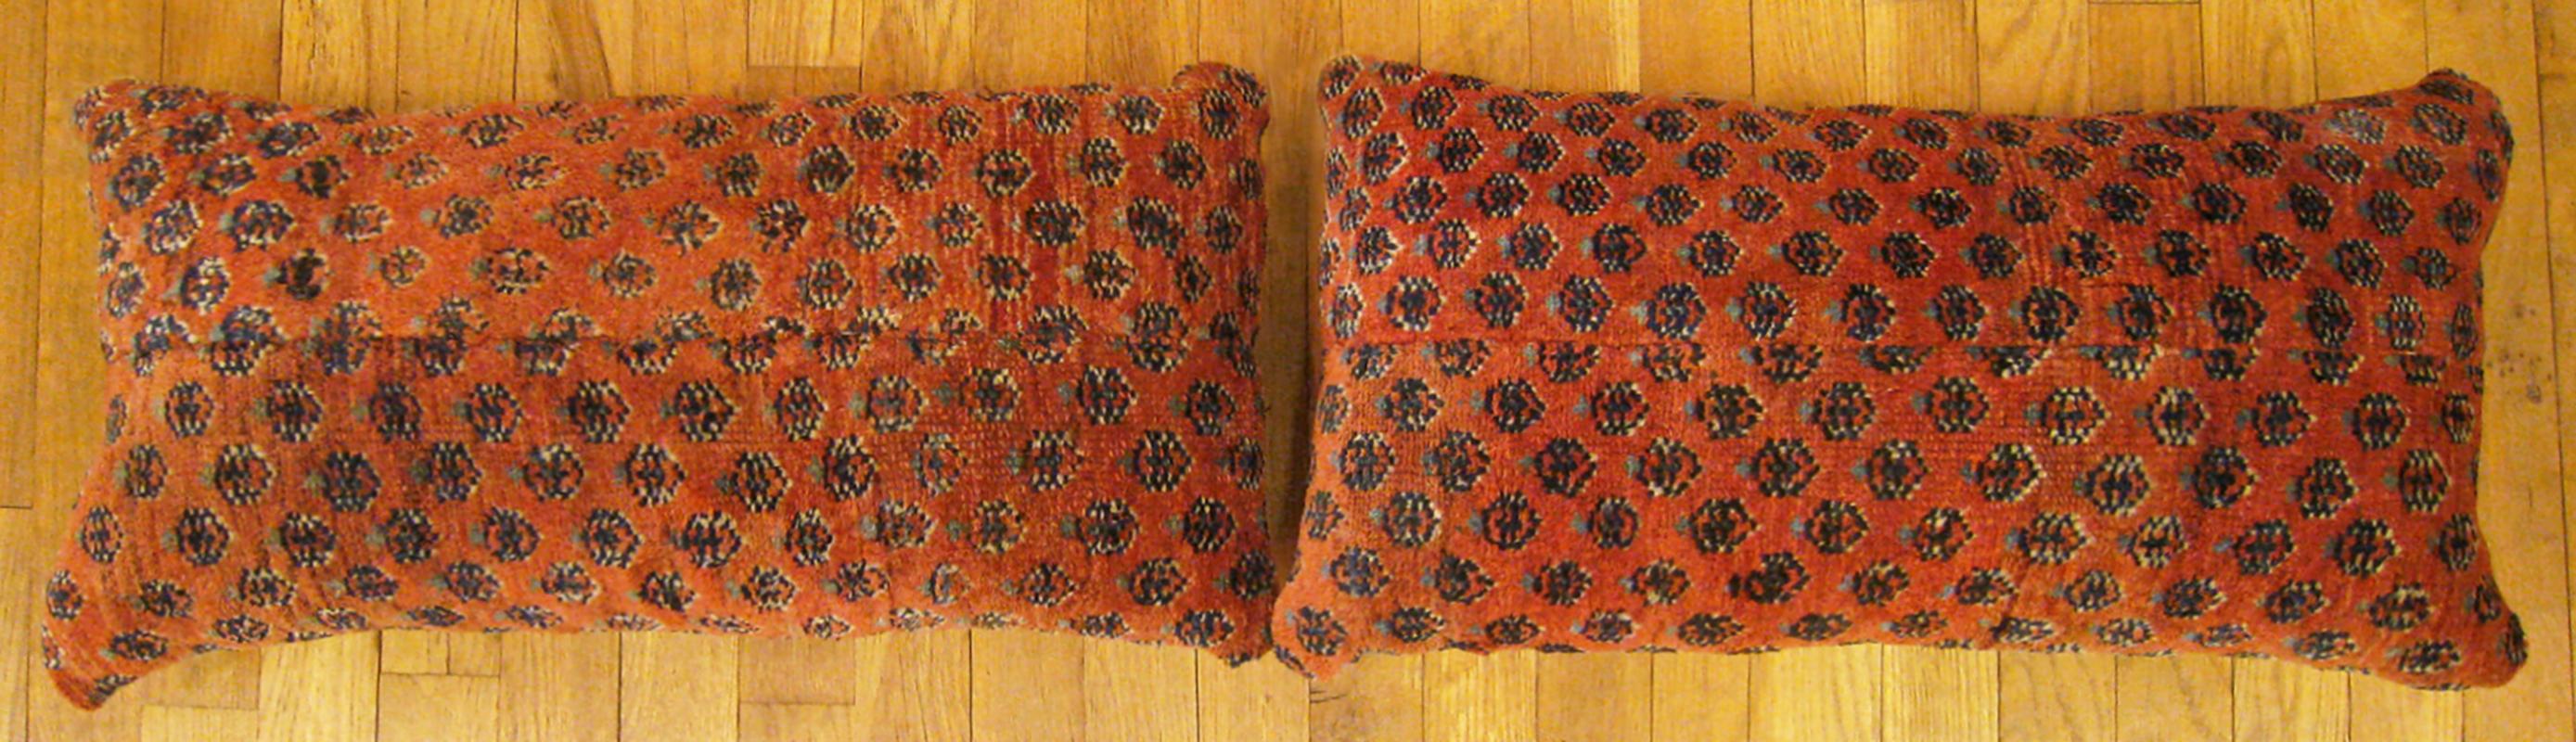 A pair of antique Persian saraband carpet pillows ; size 2'0” x 1'2” each.

An antique decorative pillows with floral elements allover a red central field, size 2'0” x 1'2” each. This lovely decorative pillow features an antique fabric of a